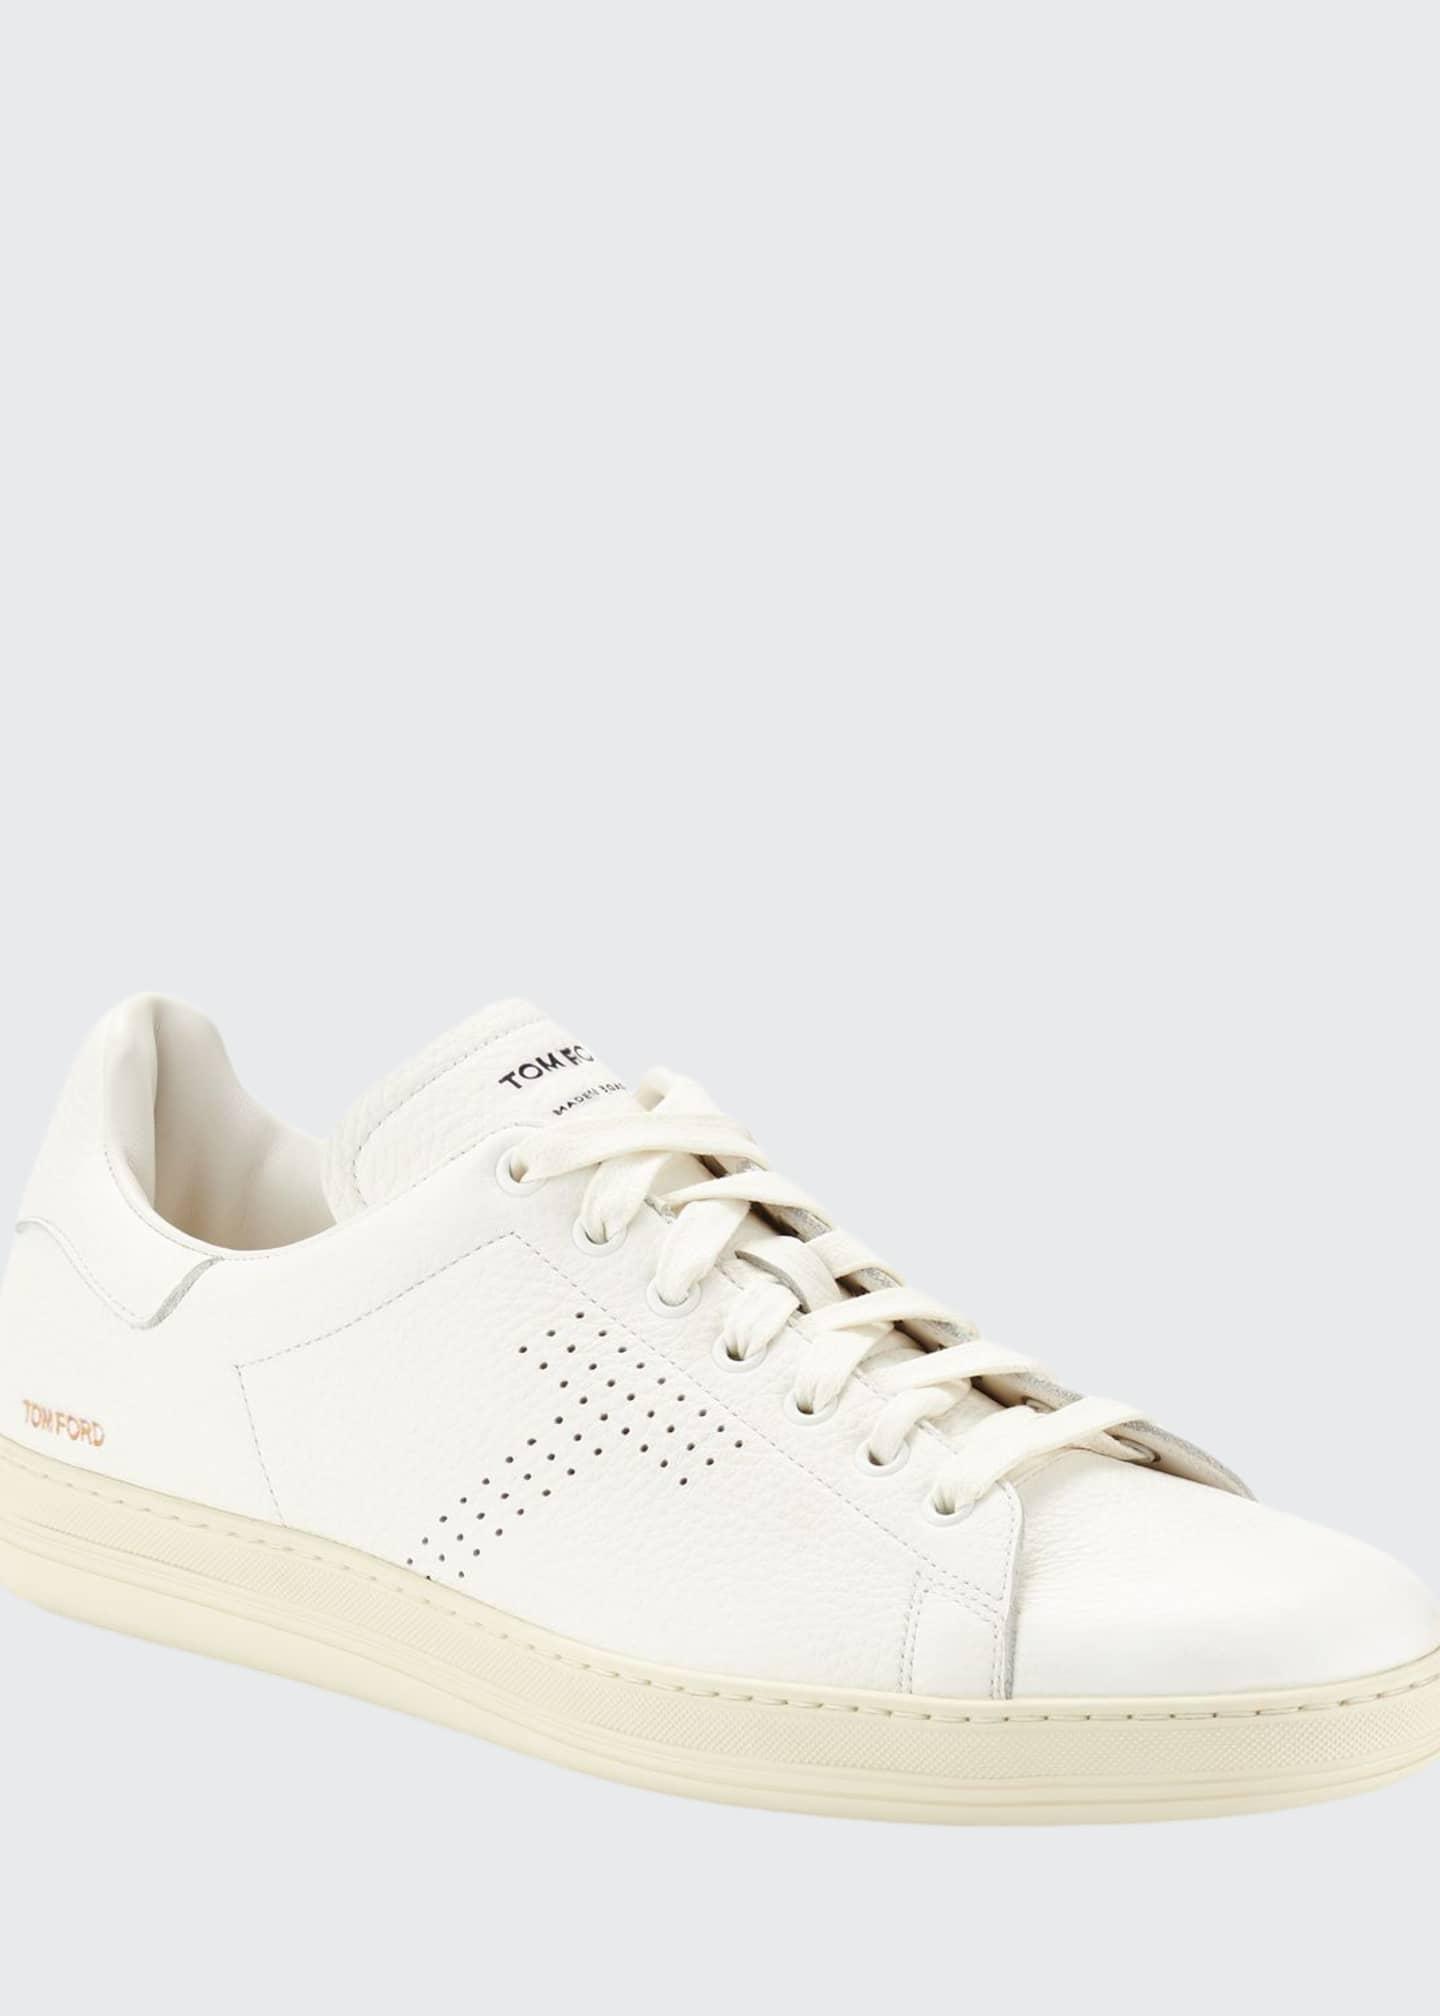 Tom Ford Men's Warwick Grained Leather Low-top Sneakers in White for ...